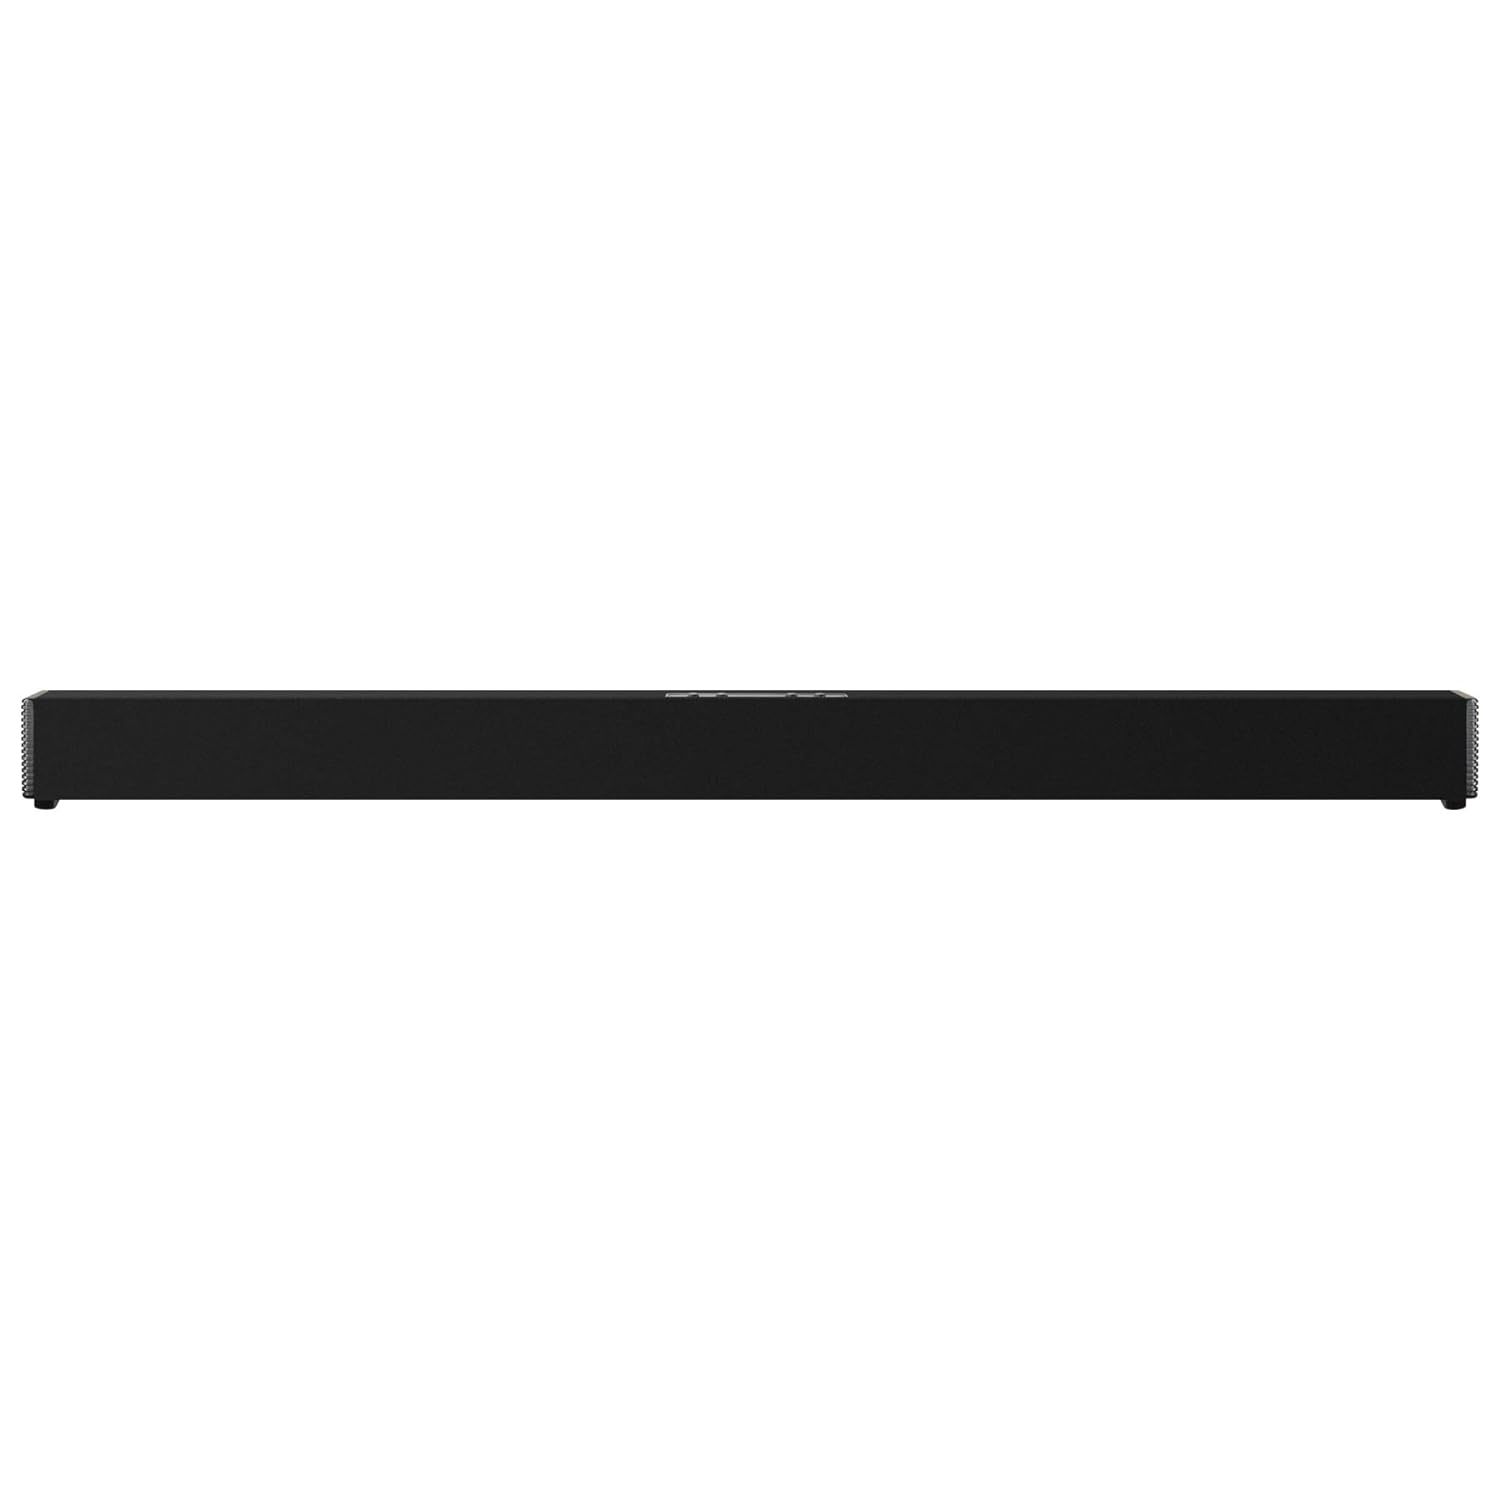 iLive Wall Mountable Sound Bar with Bluetooth, 37 Inches, Black (ITB259B) - $98.99